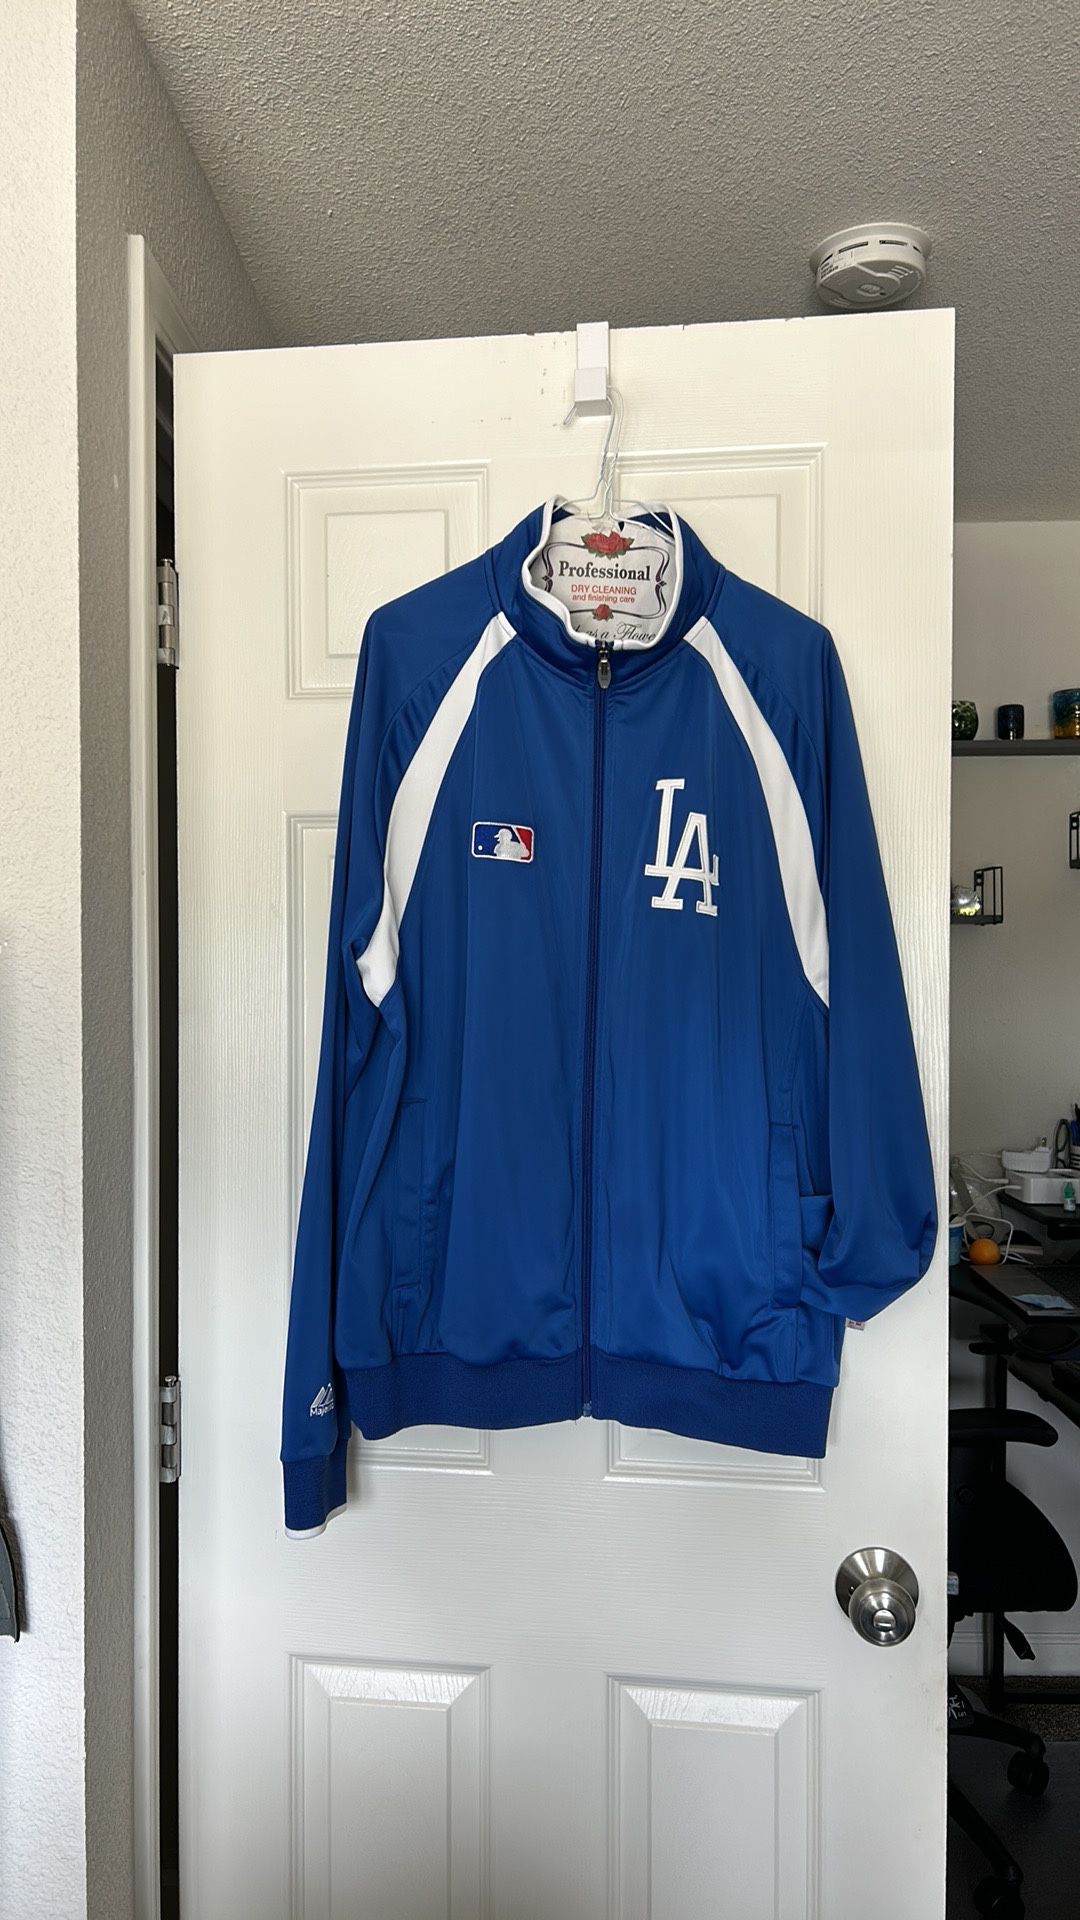 Official MLB LA Dodgers Thermal Base Zip Up Jacket by Majestic